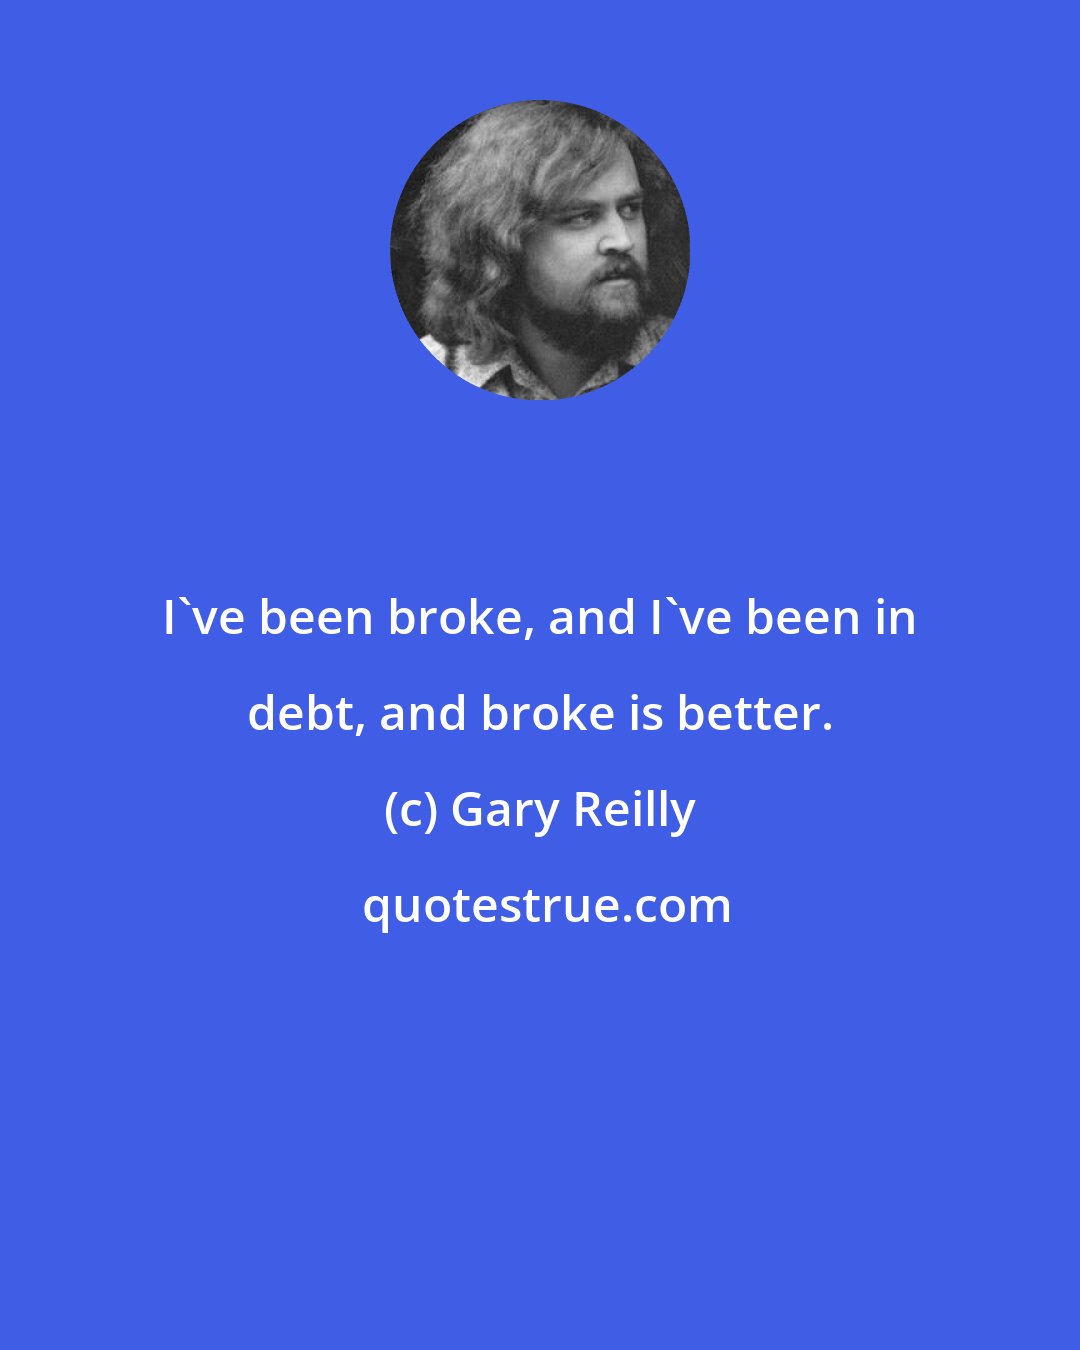 Gary Reilly: I've been broke, and I've been in debt, and broke is better.